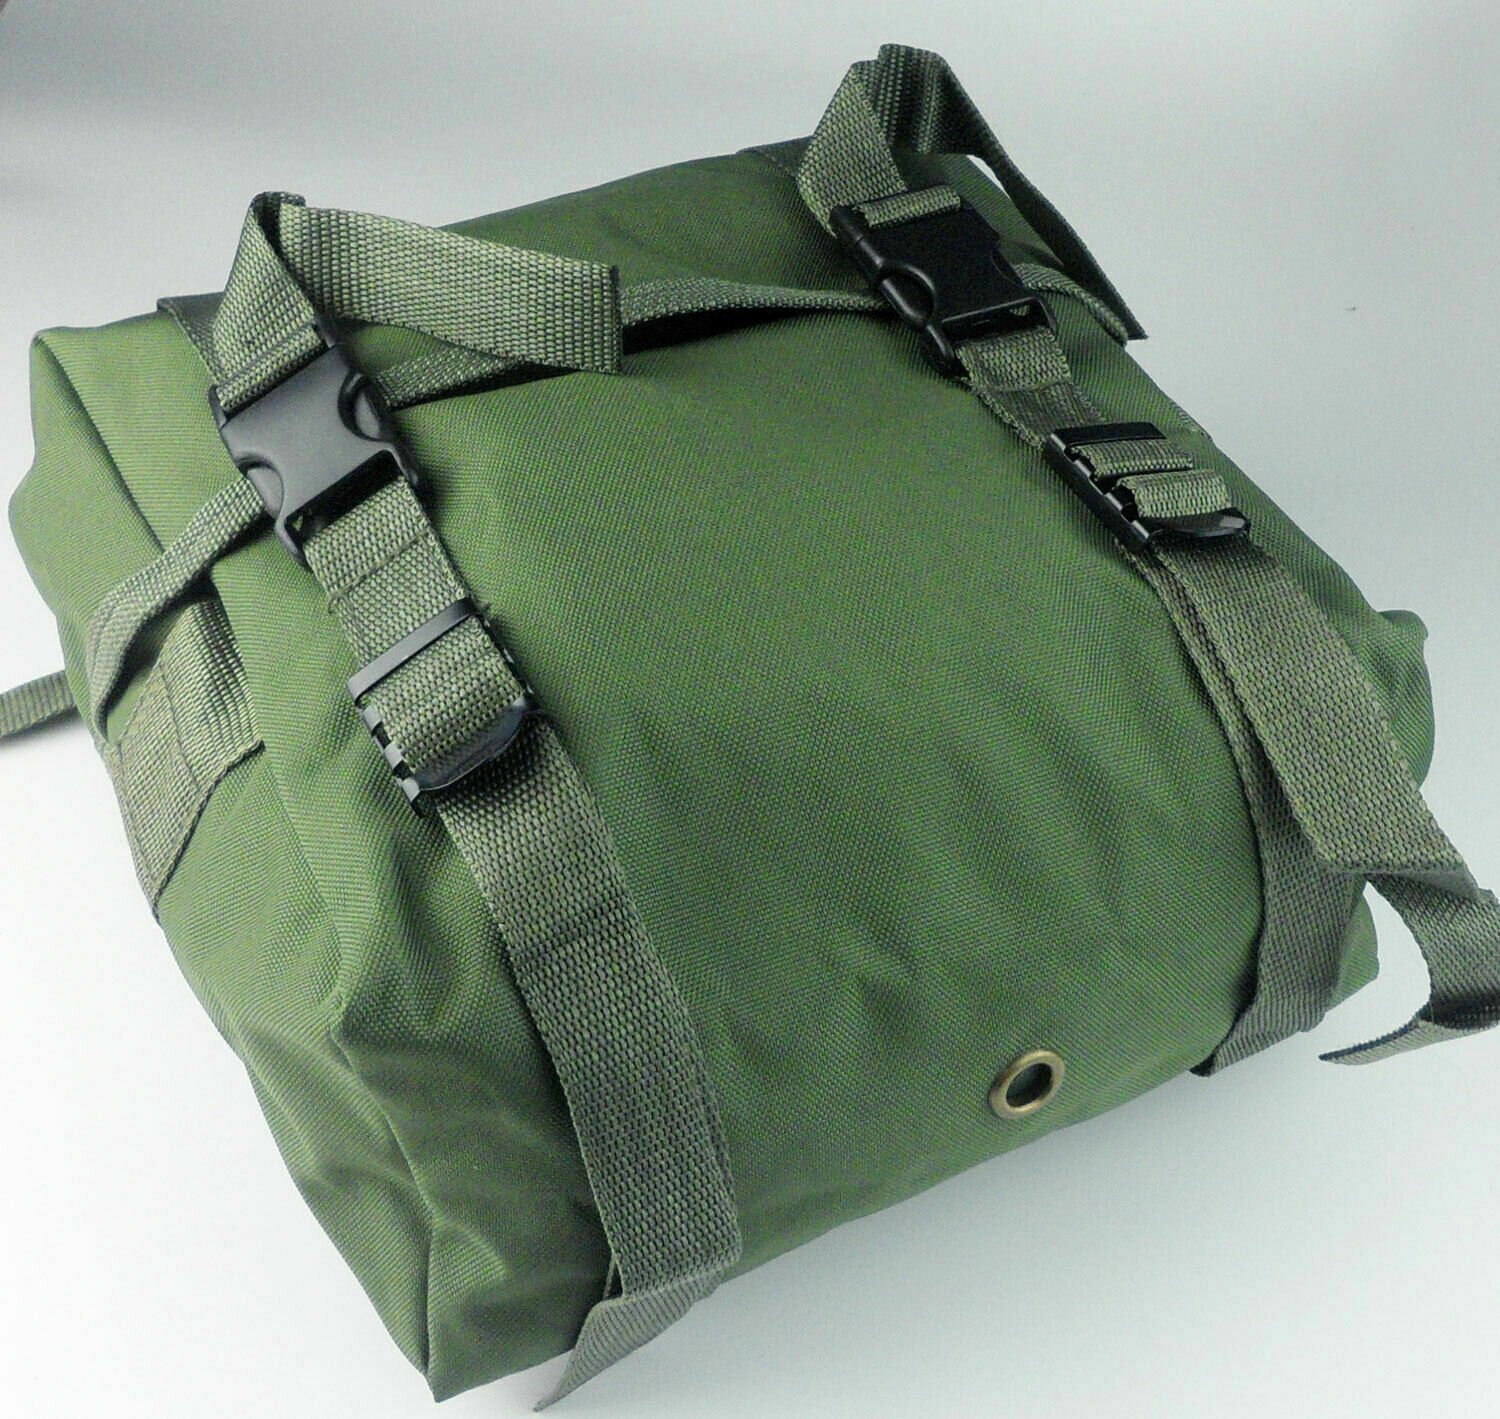 Military Tactical Us Army Vietnam War Back haversack Backpack Nylon Pouch